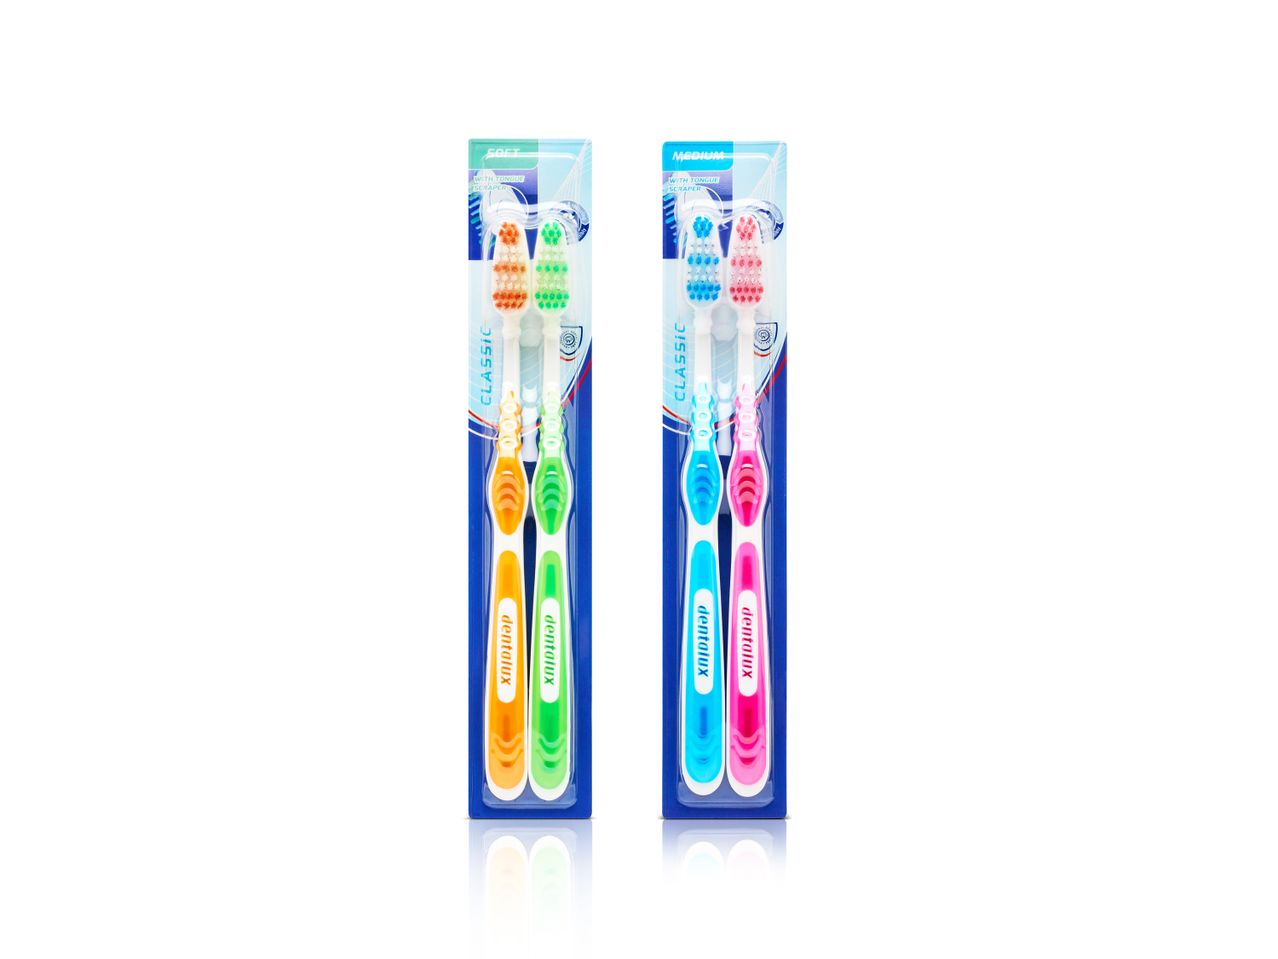 Go to full screen view: Classic Toothbrush - Image 1